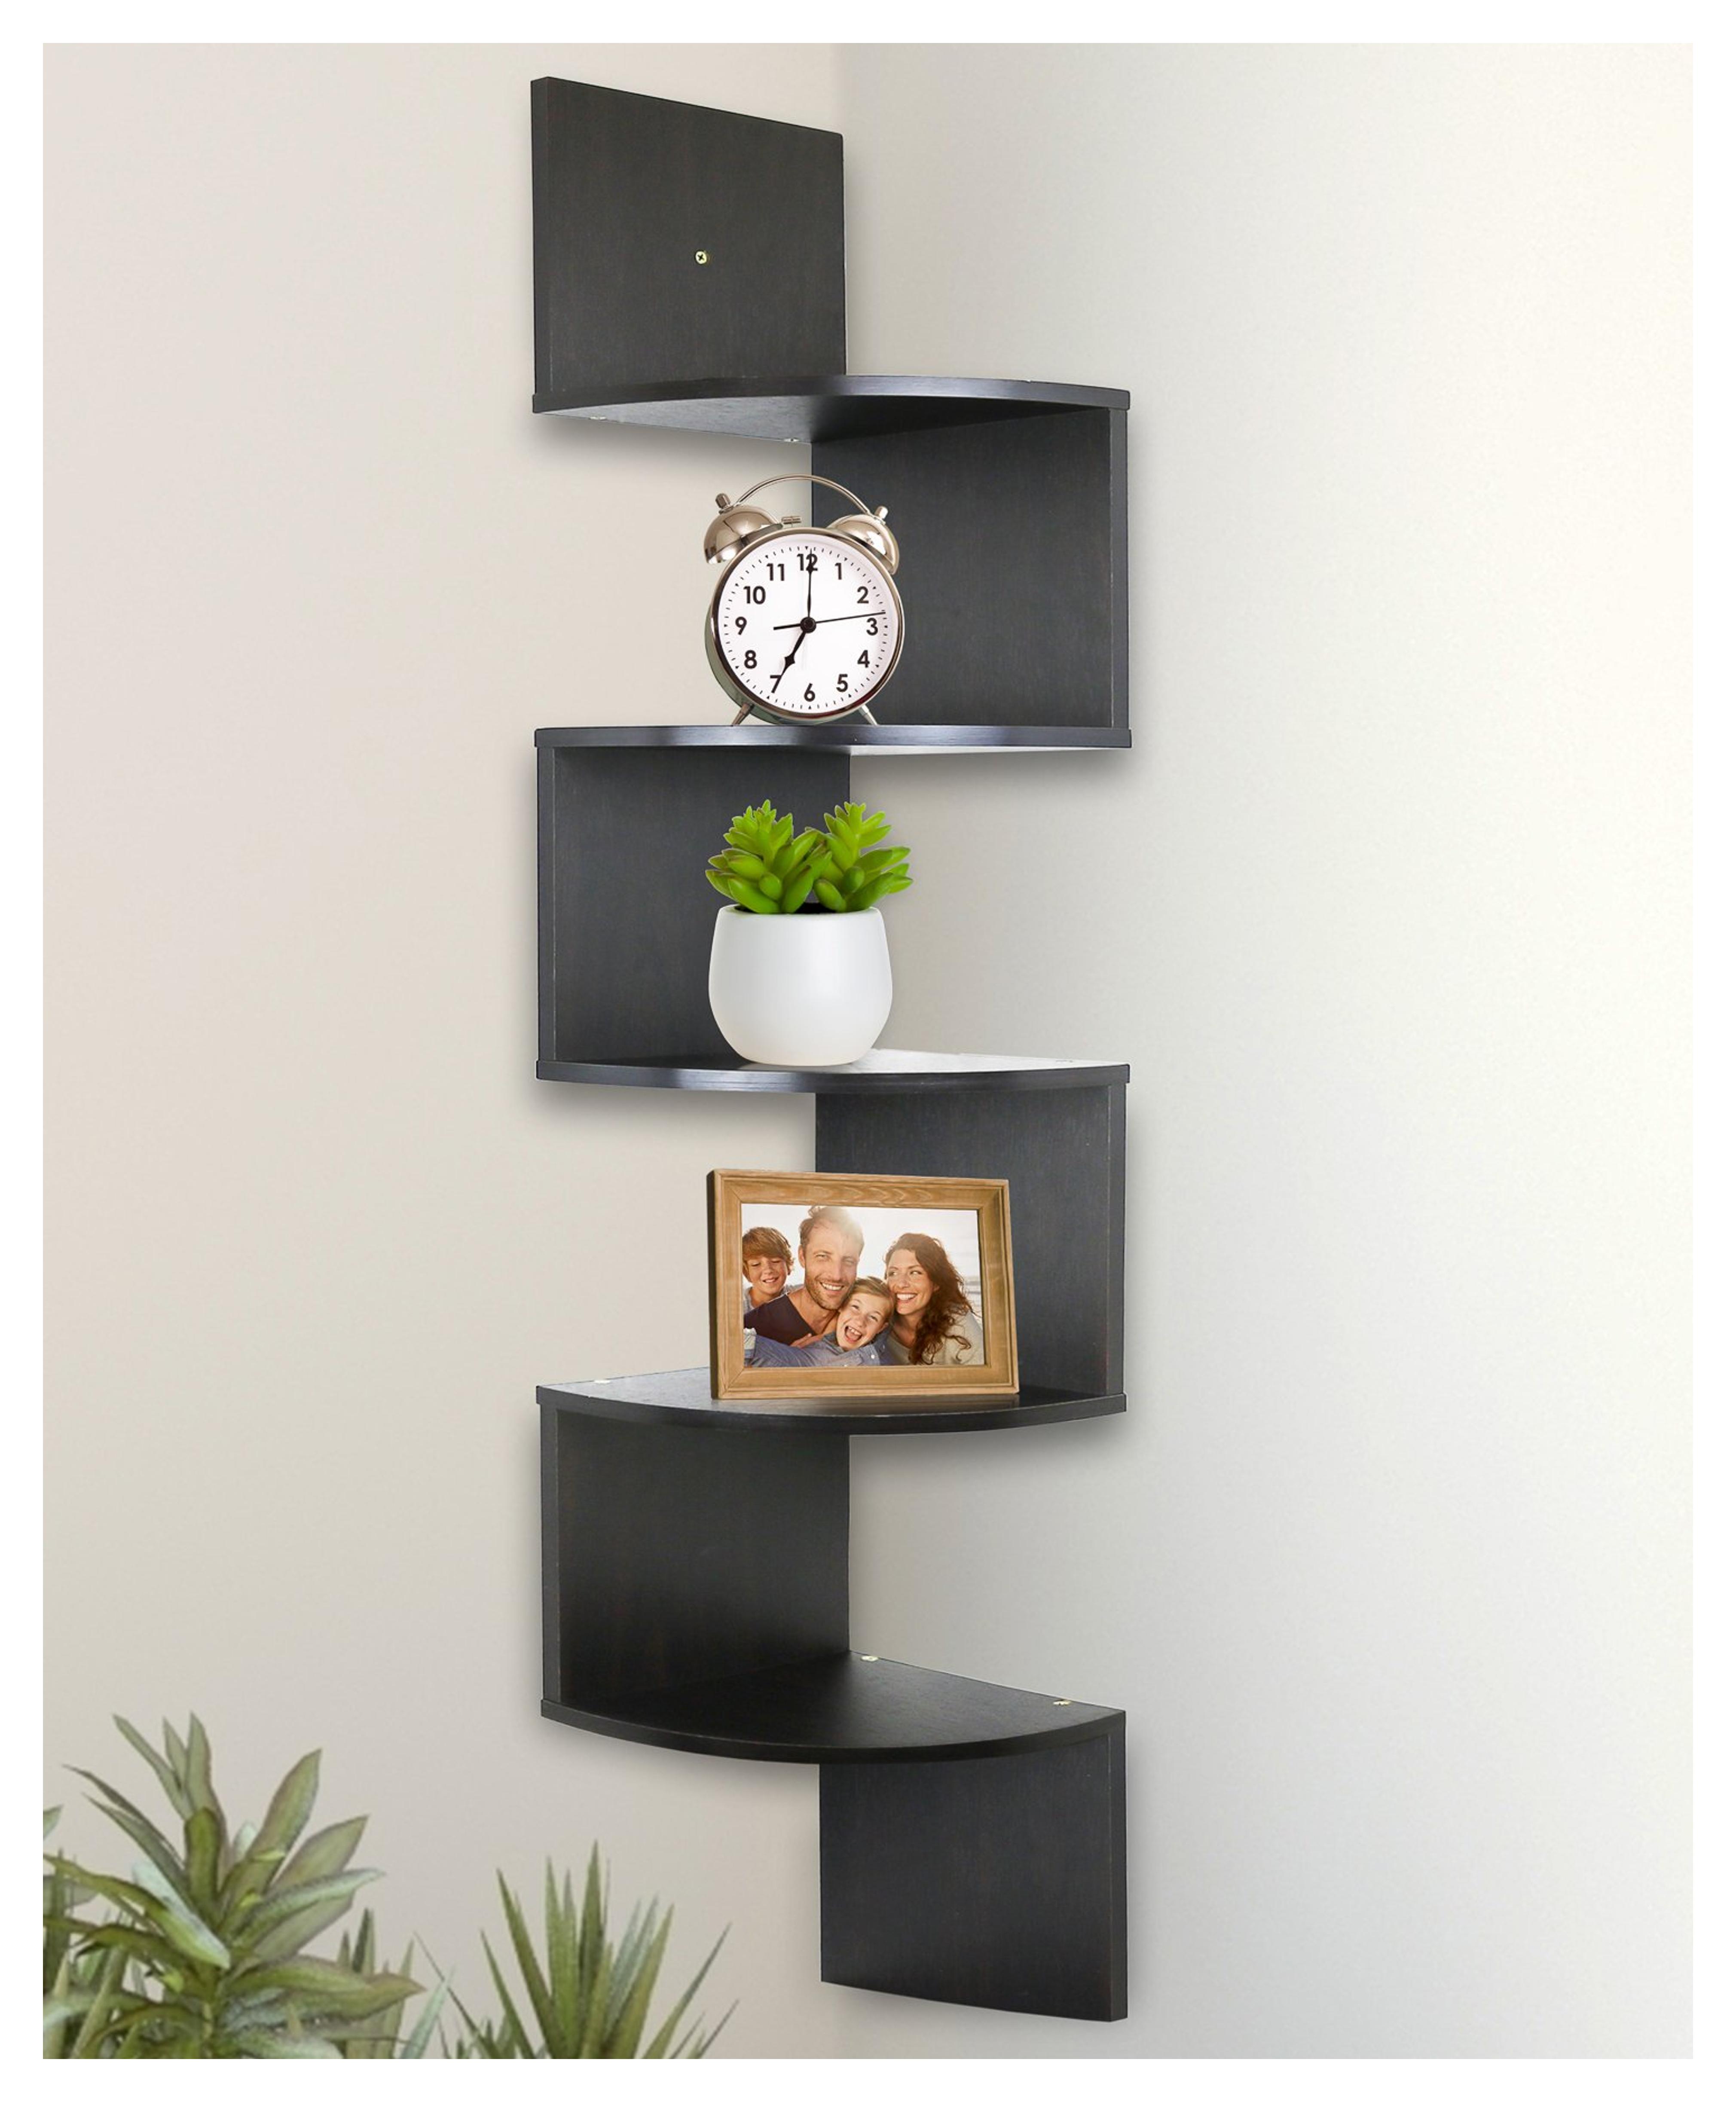 Amazon.com: Greenco Corner Shelf 5 Tier Shelves for Wall Storage, Easy-to-Assemble Floating Wall Mount Shelves for Bedrooms and Living Rooms, Espresso Finish : Home & Kitchen